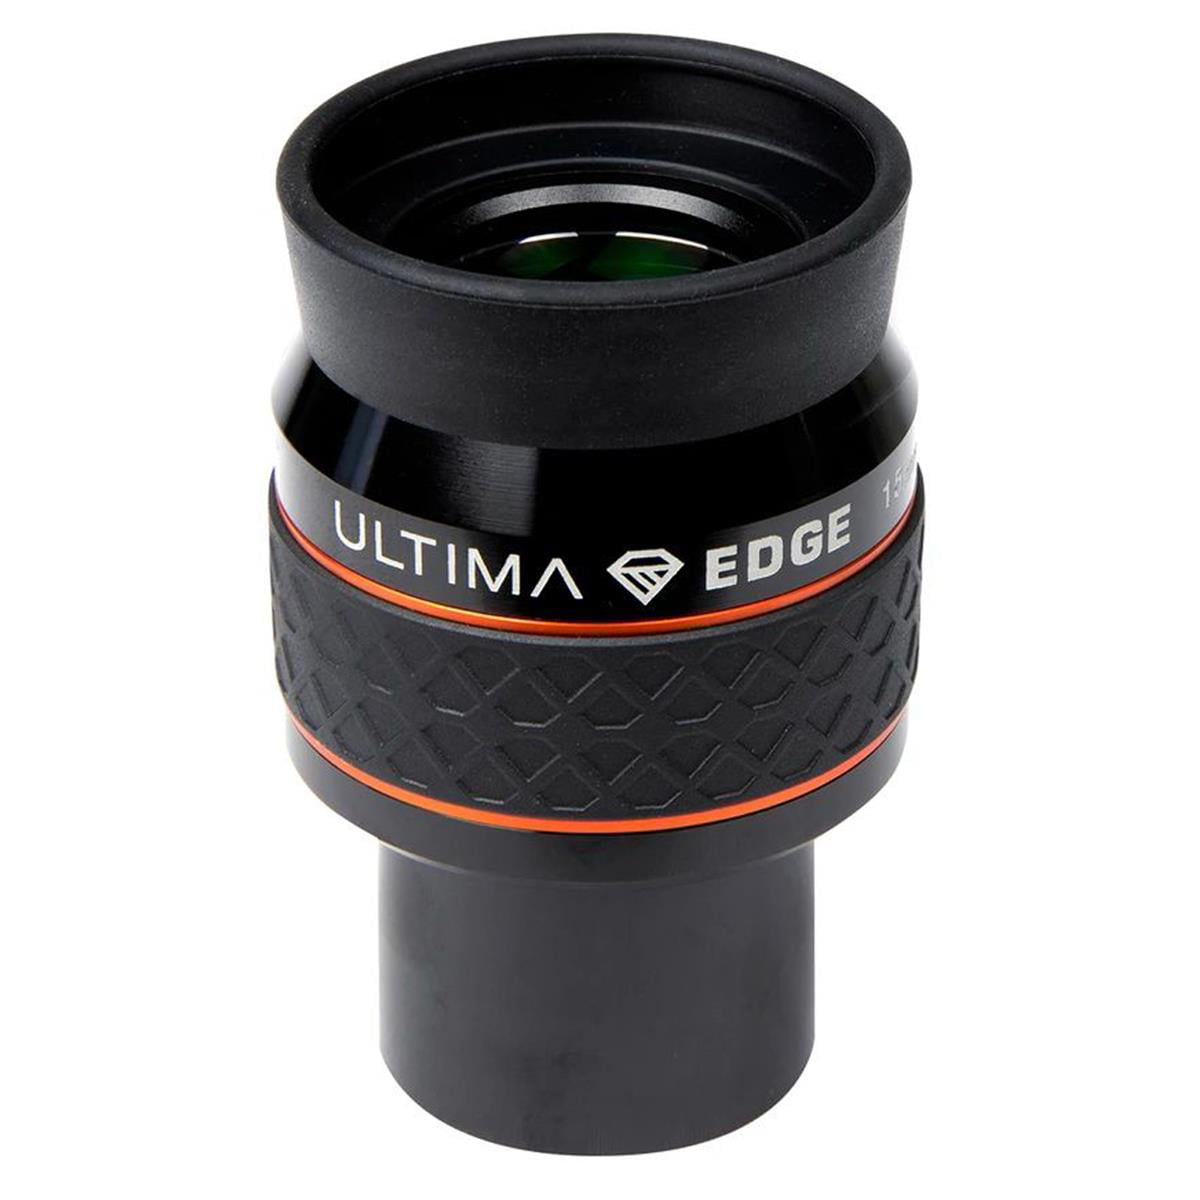 NEW Celestron 15mm 1.25" Eyepiece For Telescope With Rubber Eye Guard 